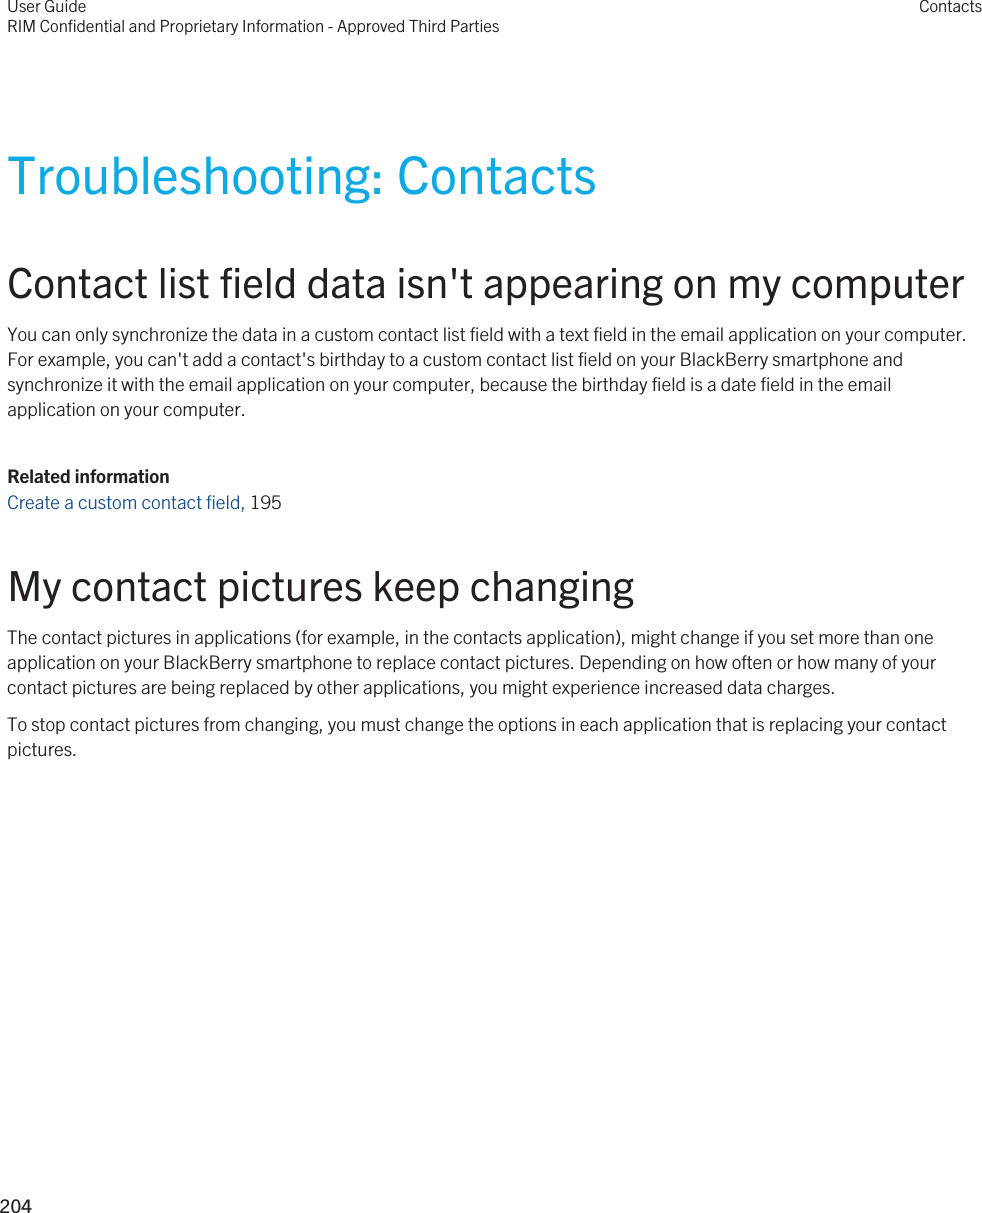 Troubleshooting: ContactsContact list field data isn&apos;t appearing on my computerYou can only synchronize the data in a custom contact list field with a text field in the email application on your computer. For example, you can&apos;t add a contact&apos;s birthday to a custom contact list field on your BlackBerry smartphone and synchronize it with the email application on your computer, because the birthday field is a date field in the email application on your computer.Related informationCreate a custom contact field, 195 My contact pictures keep changingThe contact pictures in applications (for example, in the contacts application), might change if you set more than one application on your BlackBerry smartphone to replace contact pictures. Depending on how often or how many of your contact pictures are being replaced by other applications, you might experience increased data charges.To stop contact pictures from changing, you must change the options in each application that is replacing your contact pictures.User GuideRIM Confidential and Proprietary Information - Approved Third PartiesContacts204 